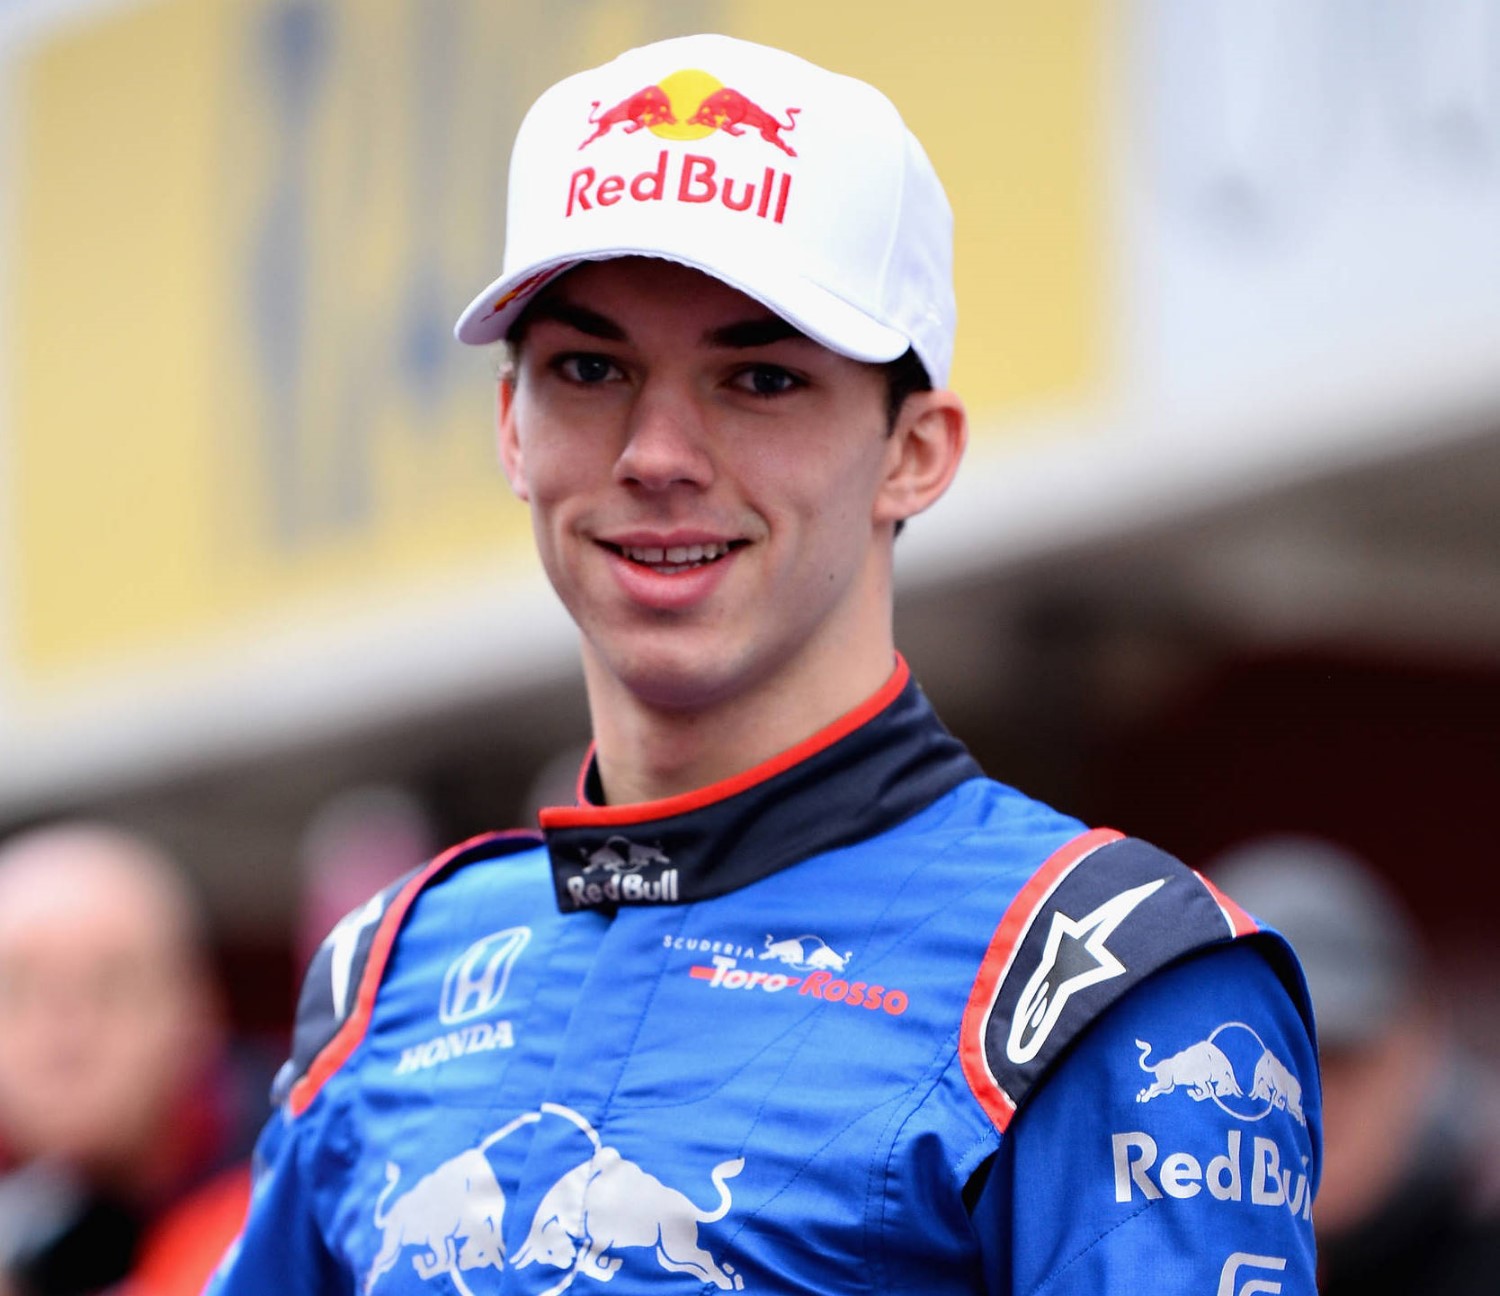 Will Gasly be buried by Verstappen?